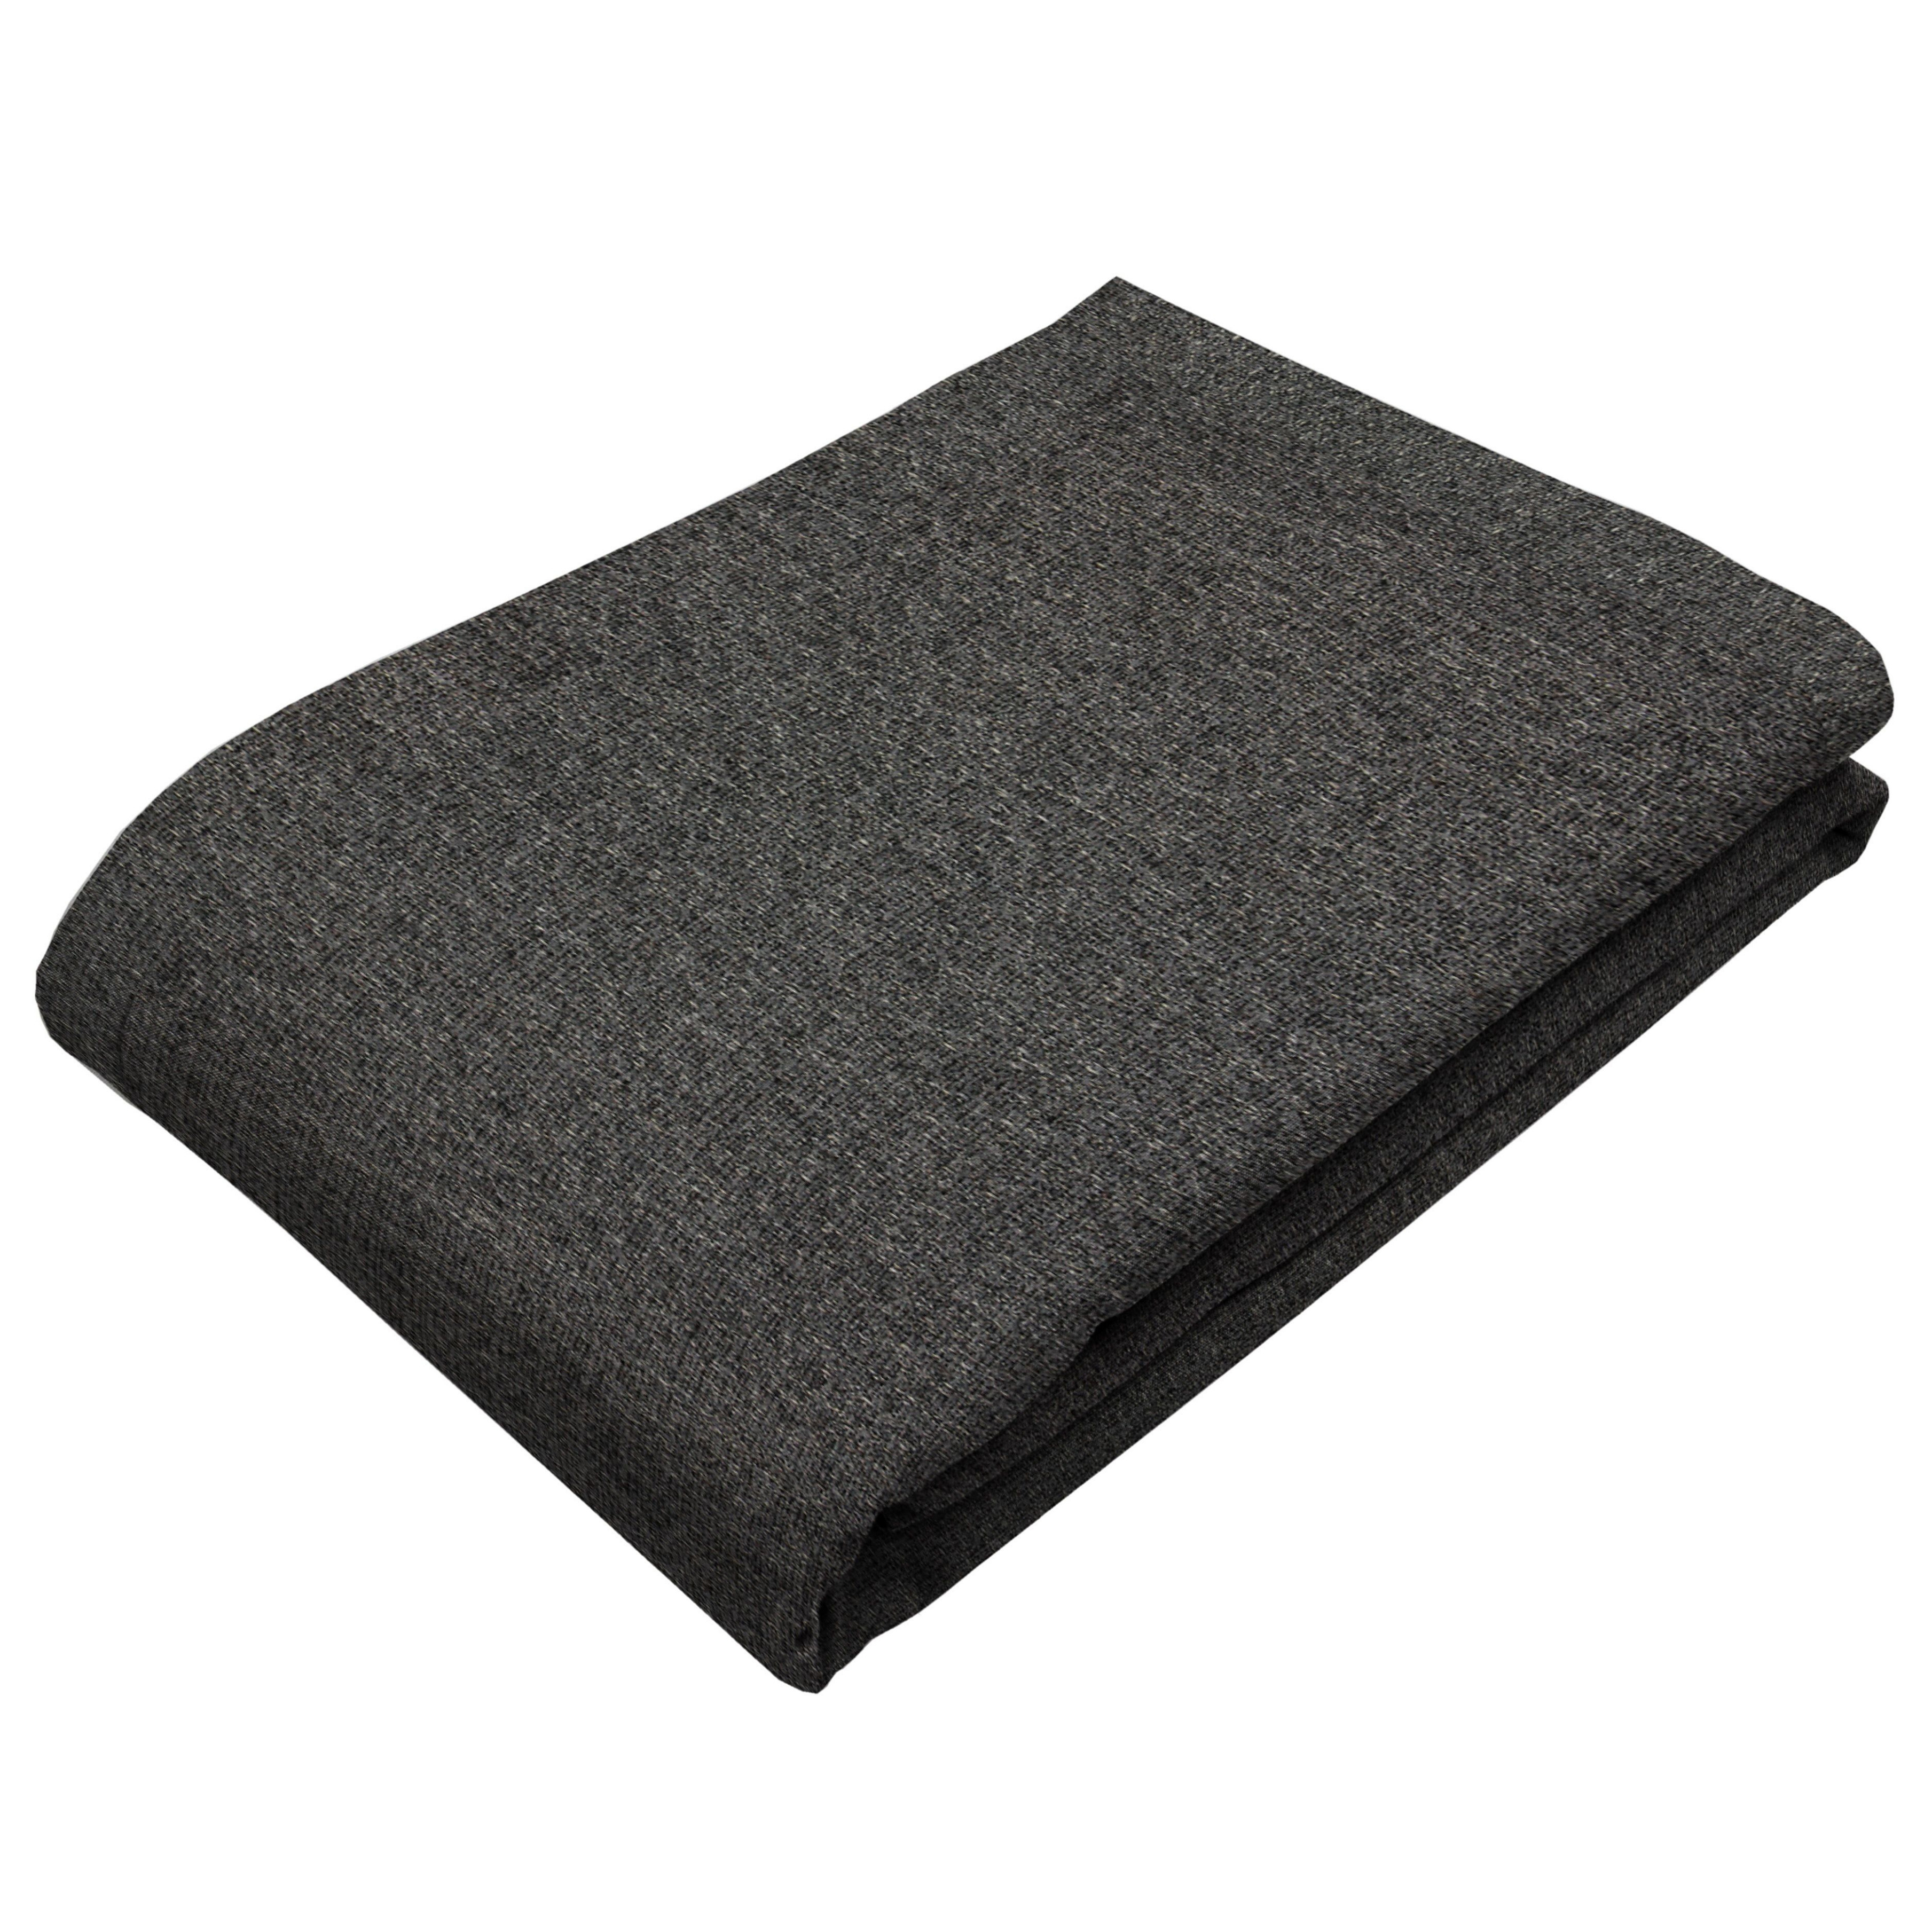 Highlands Charcoal Grey Throws & Runners, Bed Runner (50cm x 240cm)